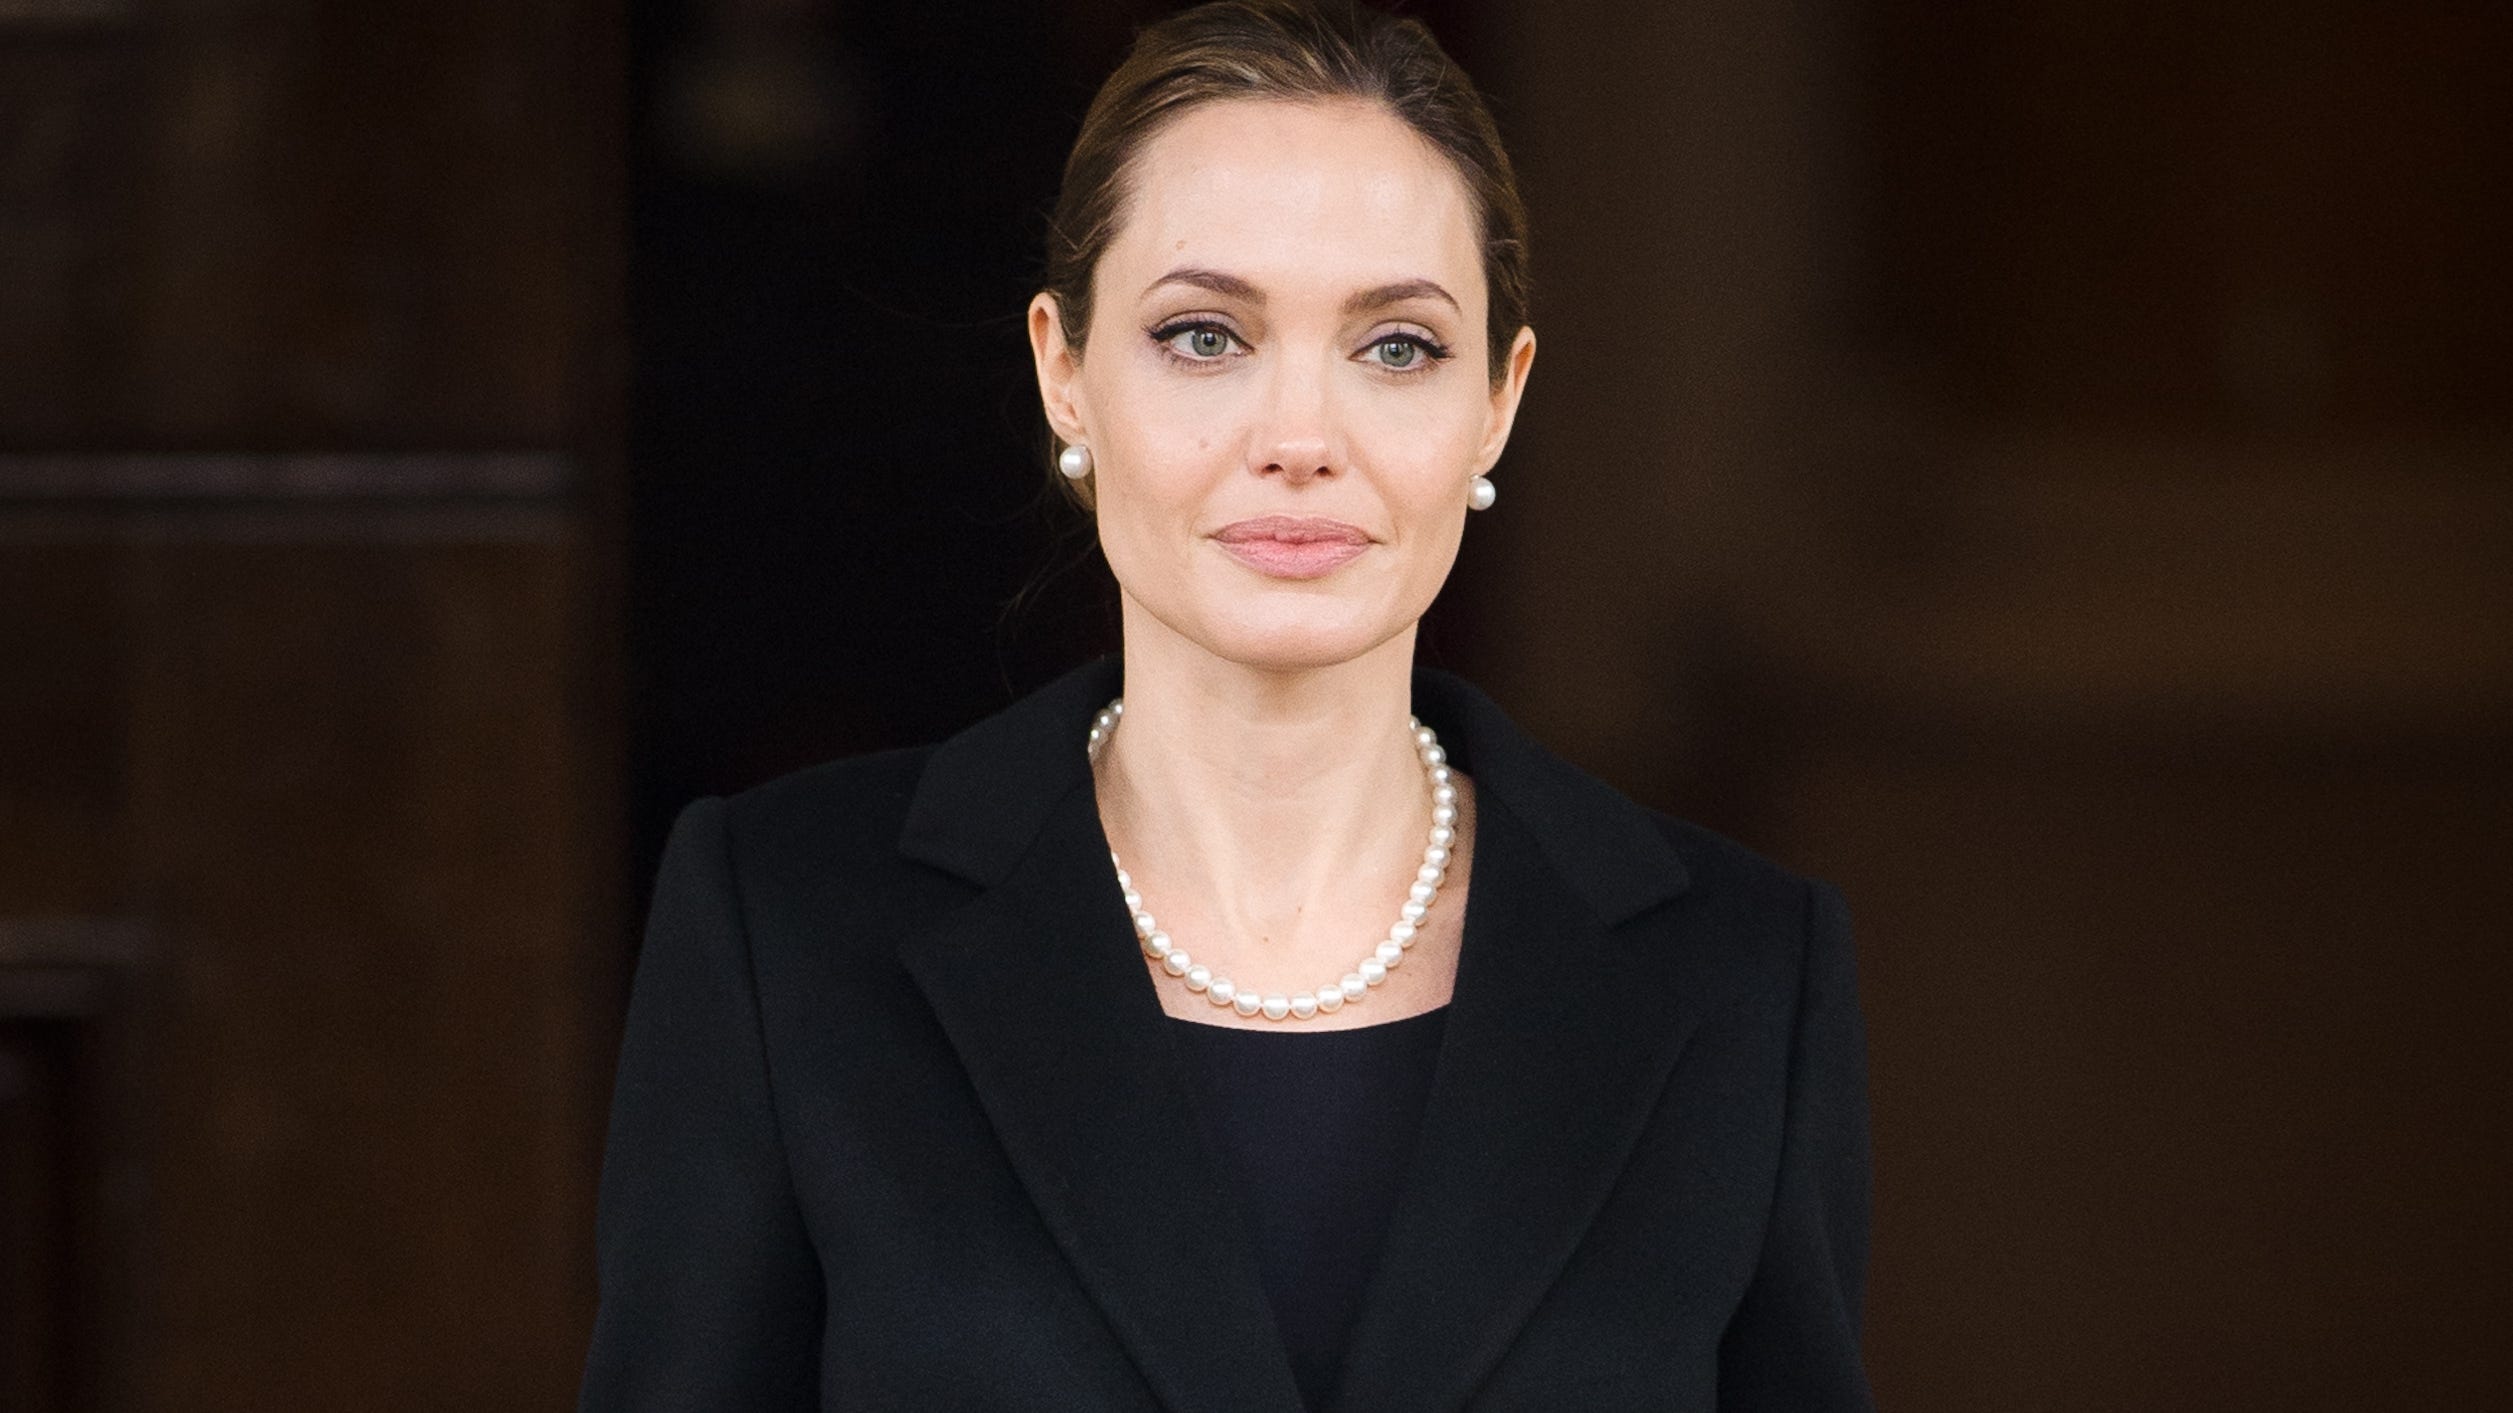 Angelina Jolie's breast cancer op-ed may have cost the health system $14  million in unnecessary tests - Vox